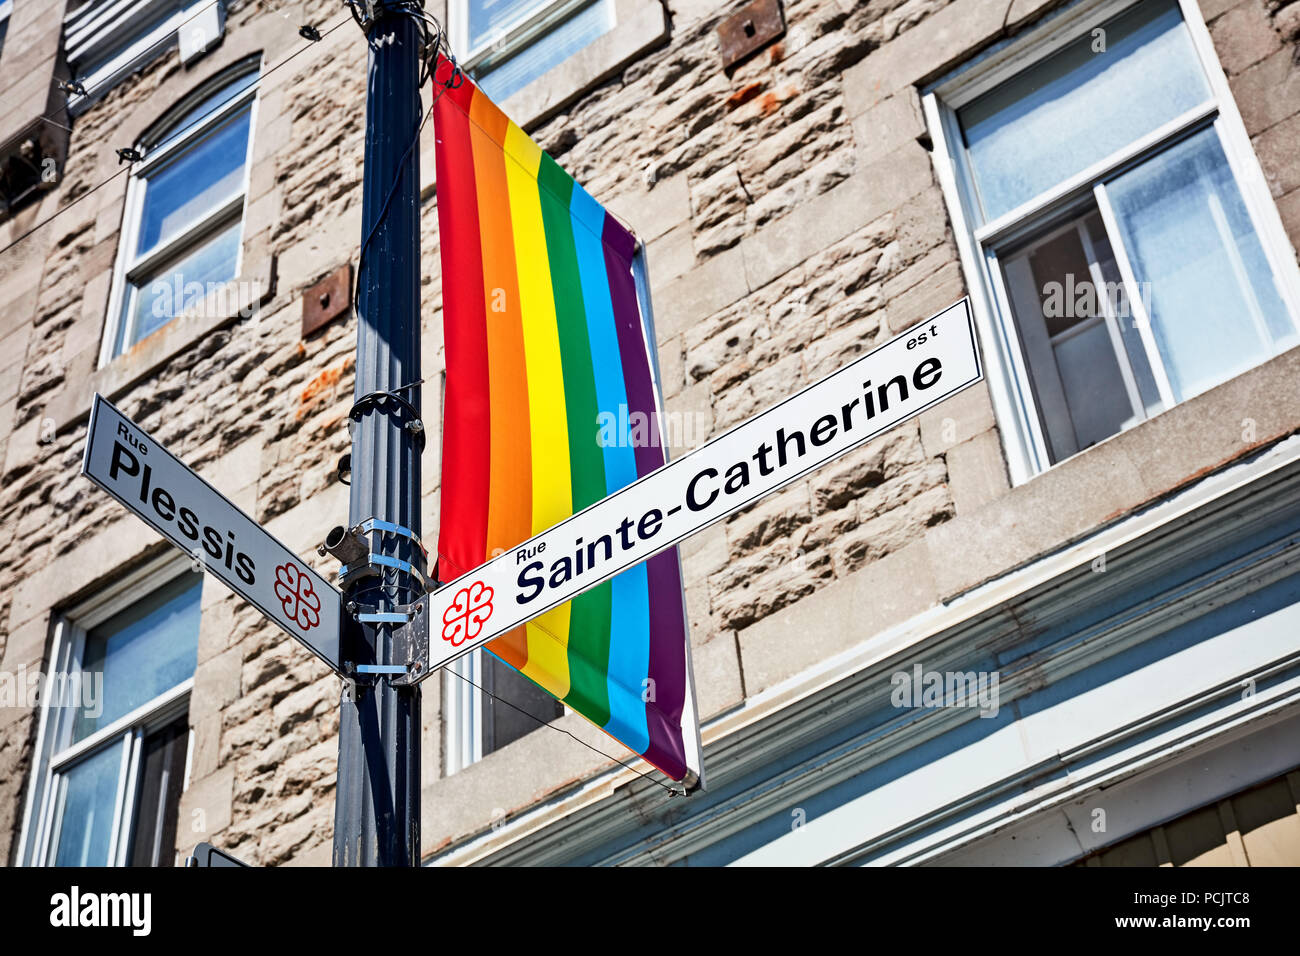 3,158 Montreal Pride Images, Stock Photos, 3D objects, & Vectors